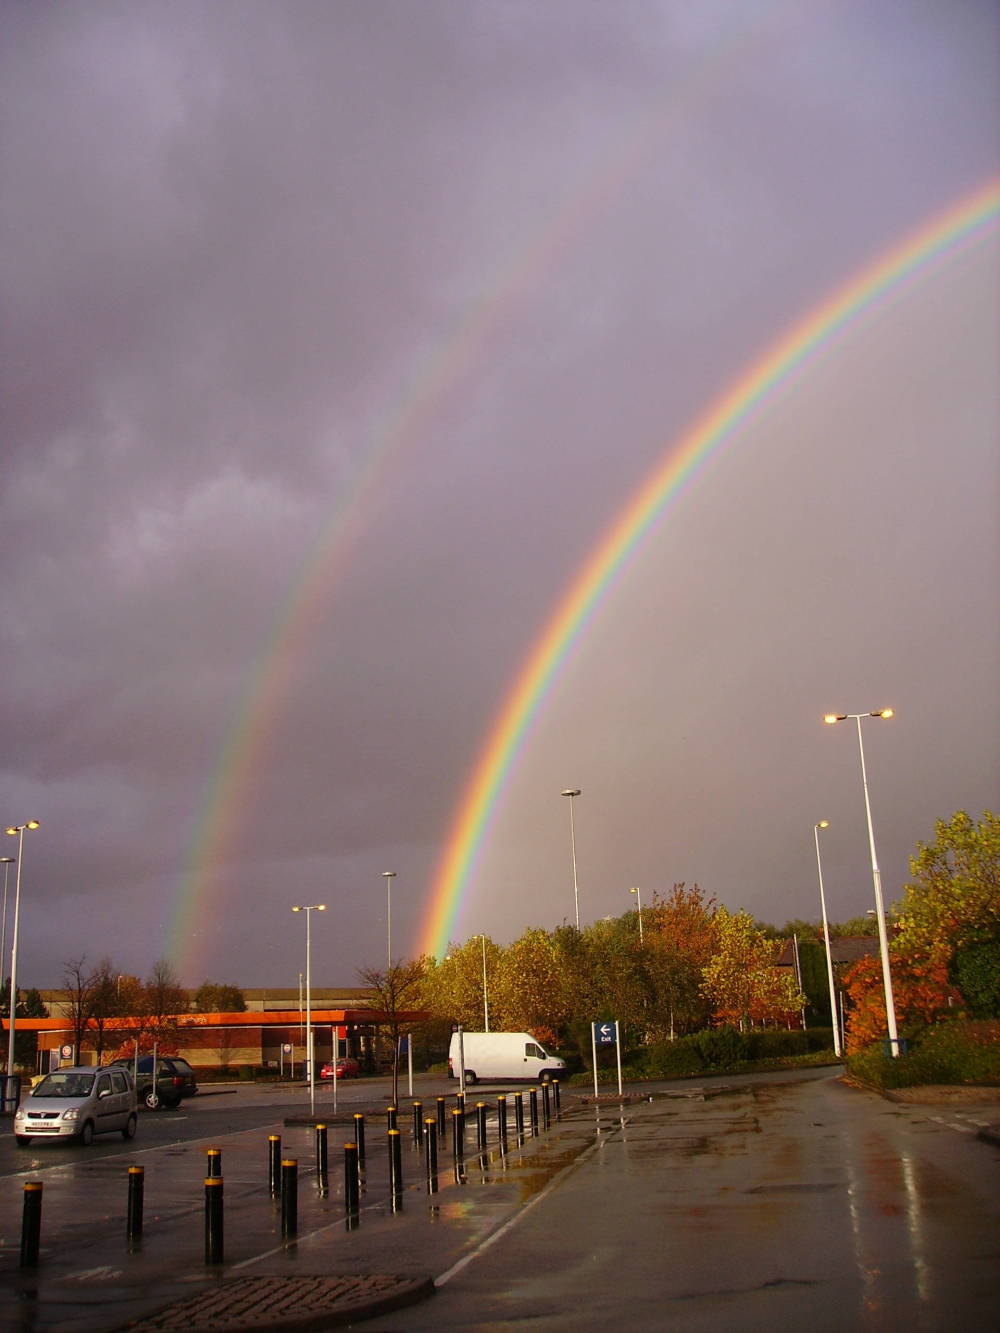 A Petrol Station at the End of the Rainbow